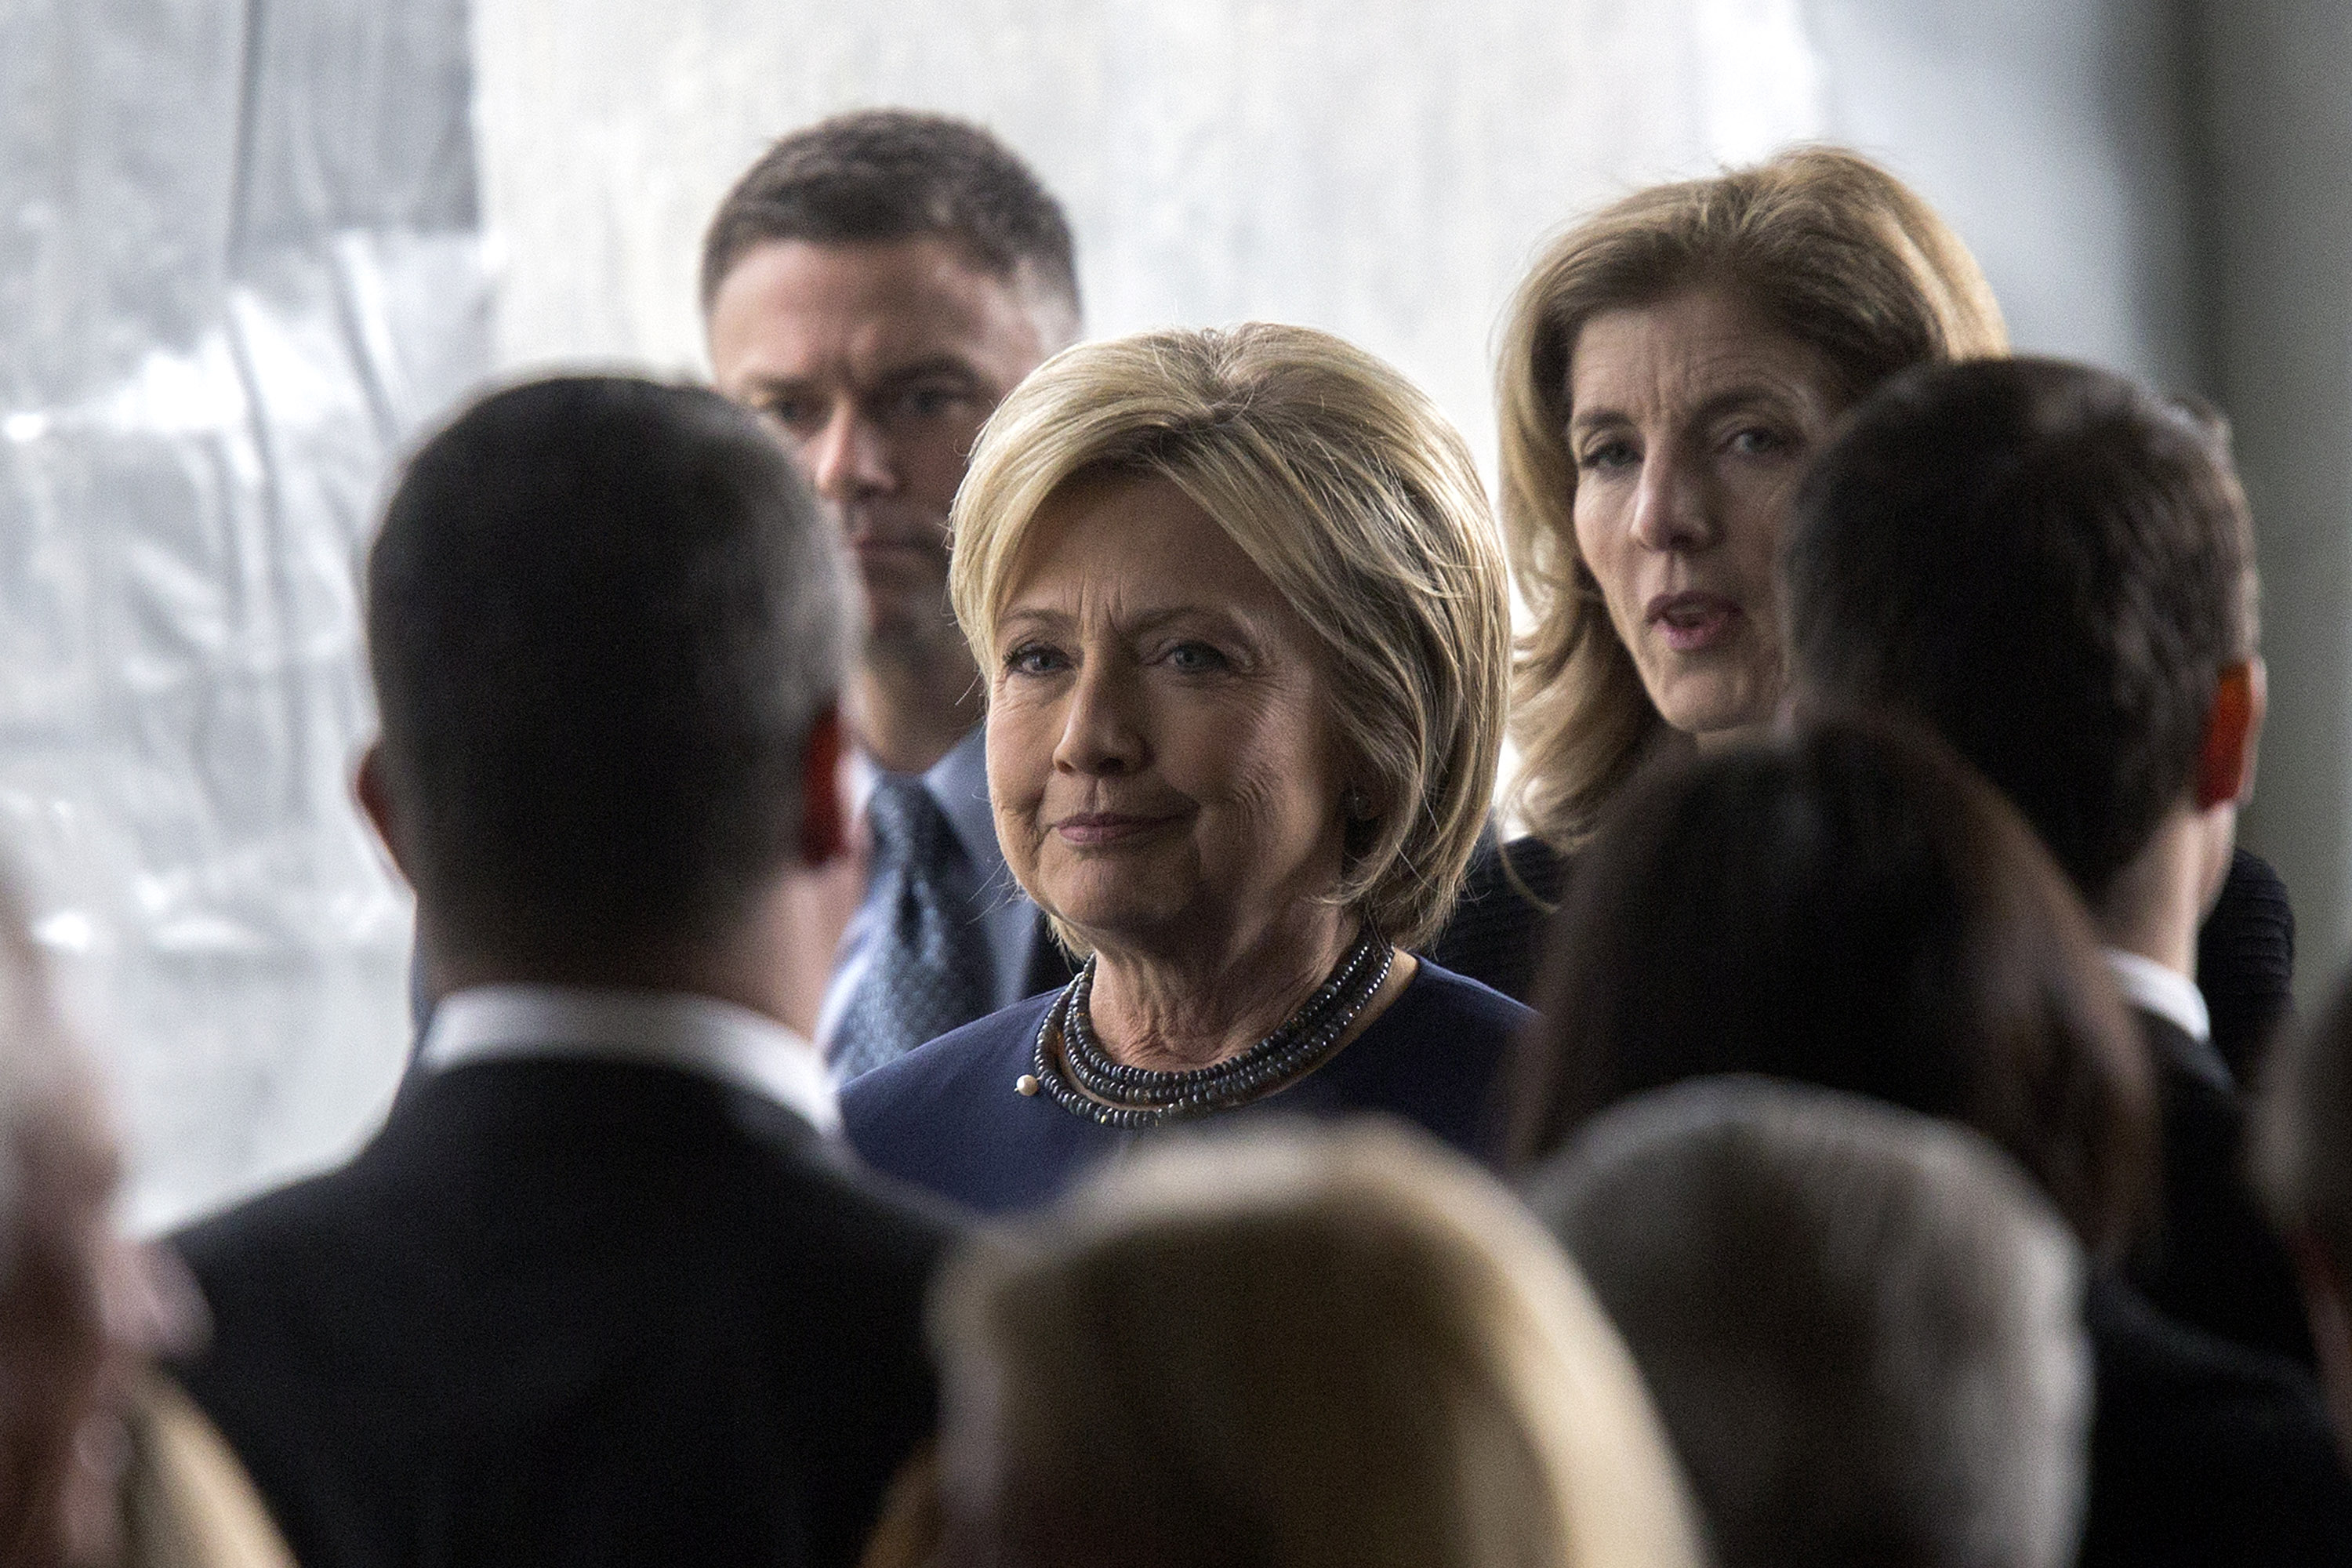 Democratic presidential candidate Hillary Clinton follows the casket during funeral and burial services for former first lady Nancy Reagan at the Ronald Reagan Presidential Library on March 11, 2016 in Simi Valley, Calif. (David McNew—2016 Getty Images)